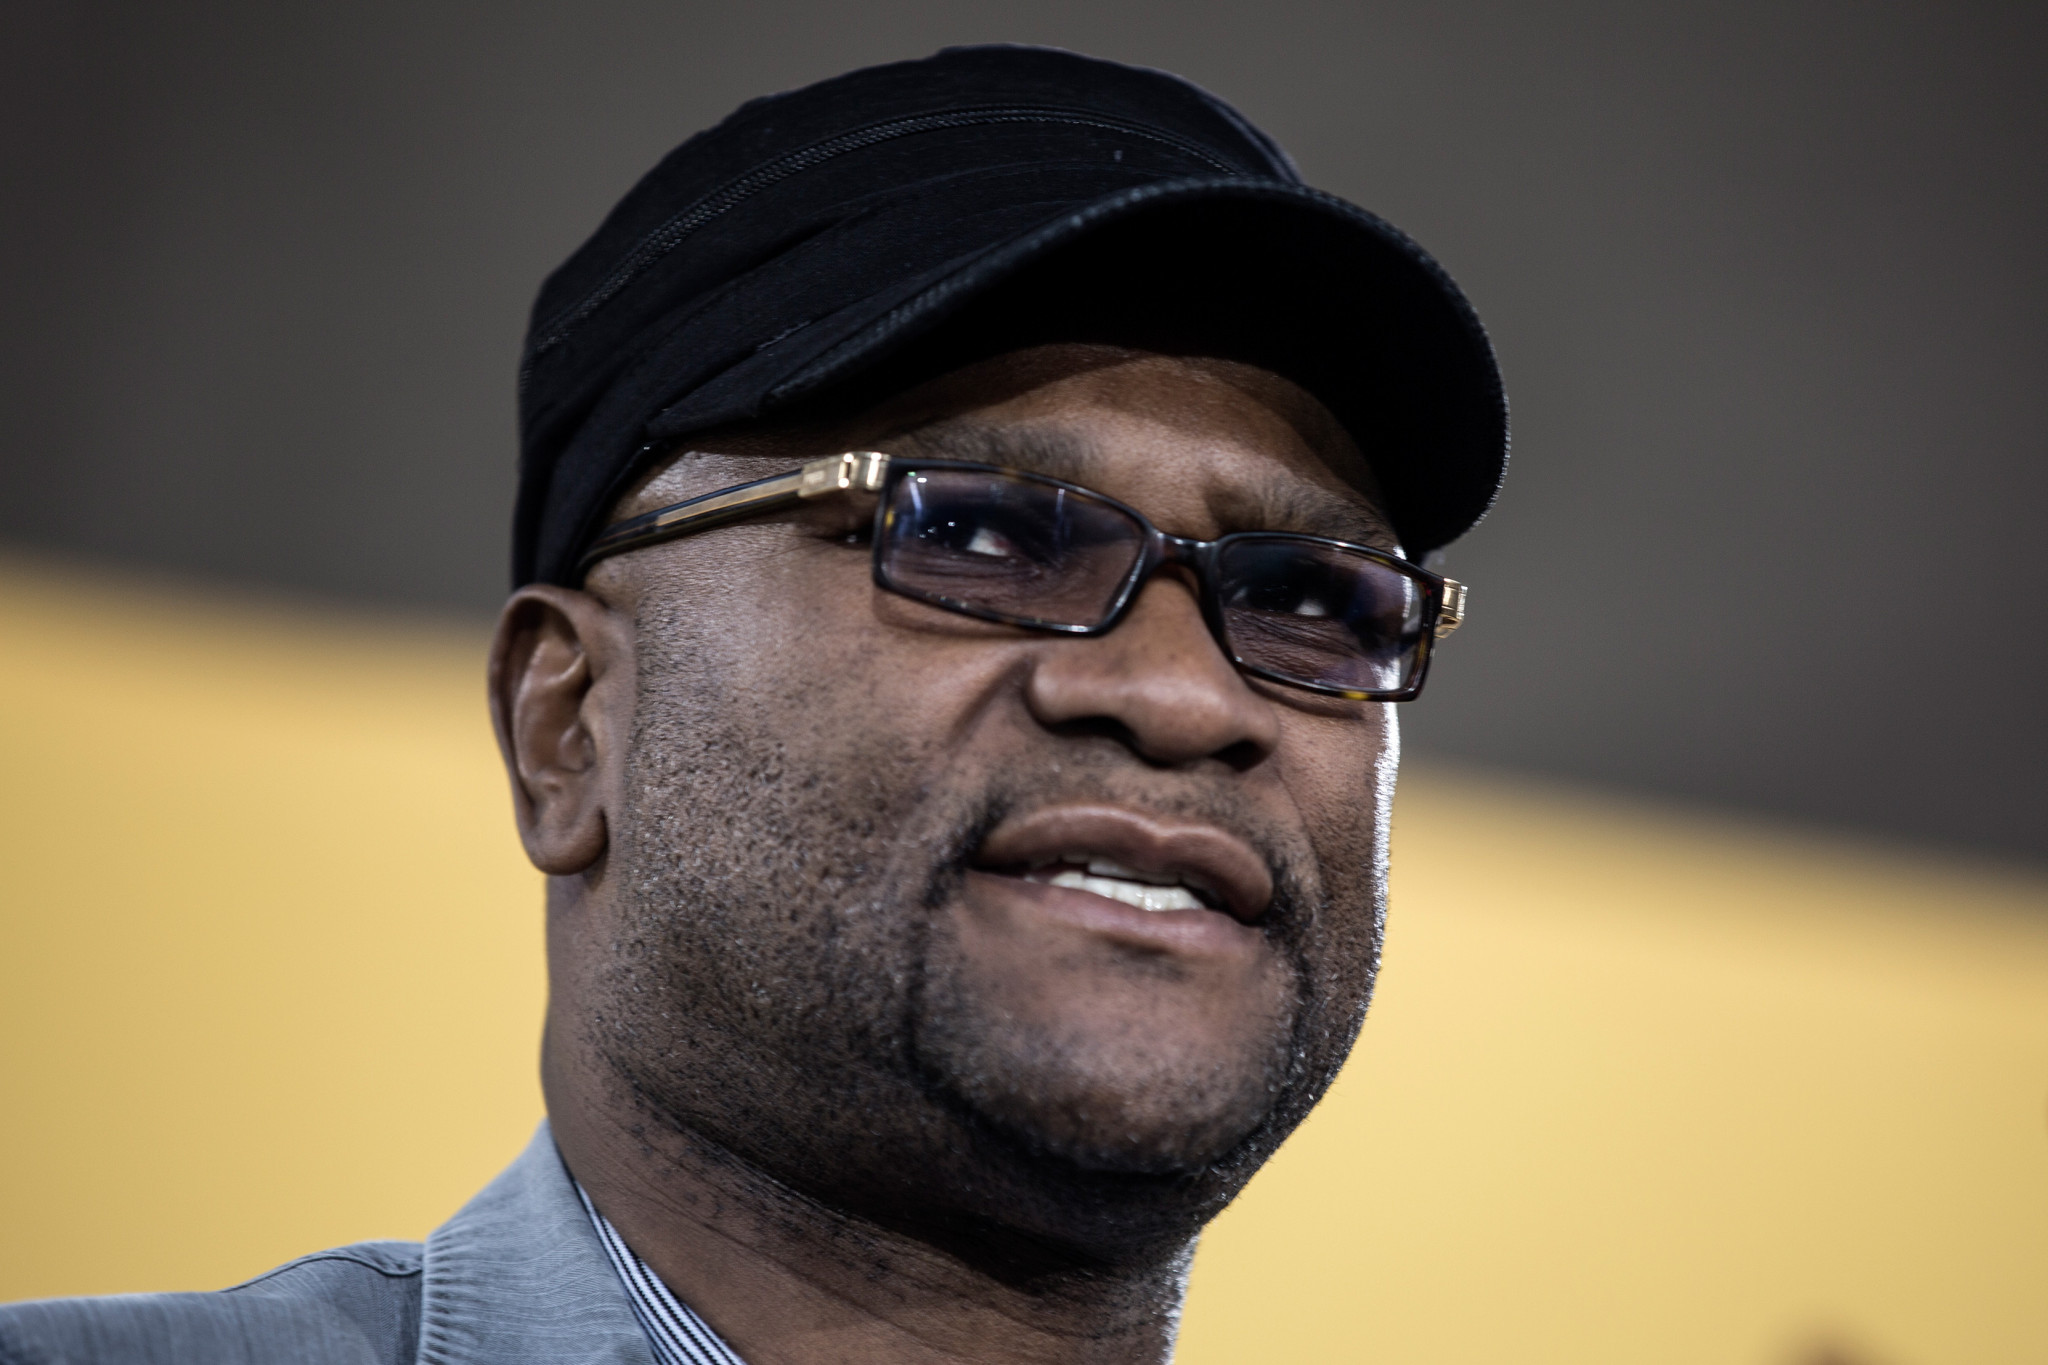 Nathi Mthethwa, South Africa's Minister of Sport, Arts and Culture, has welcomed Sam Ramsamy's appointment ©Getty Images